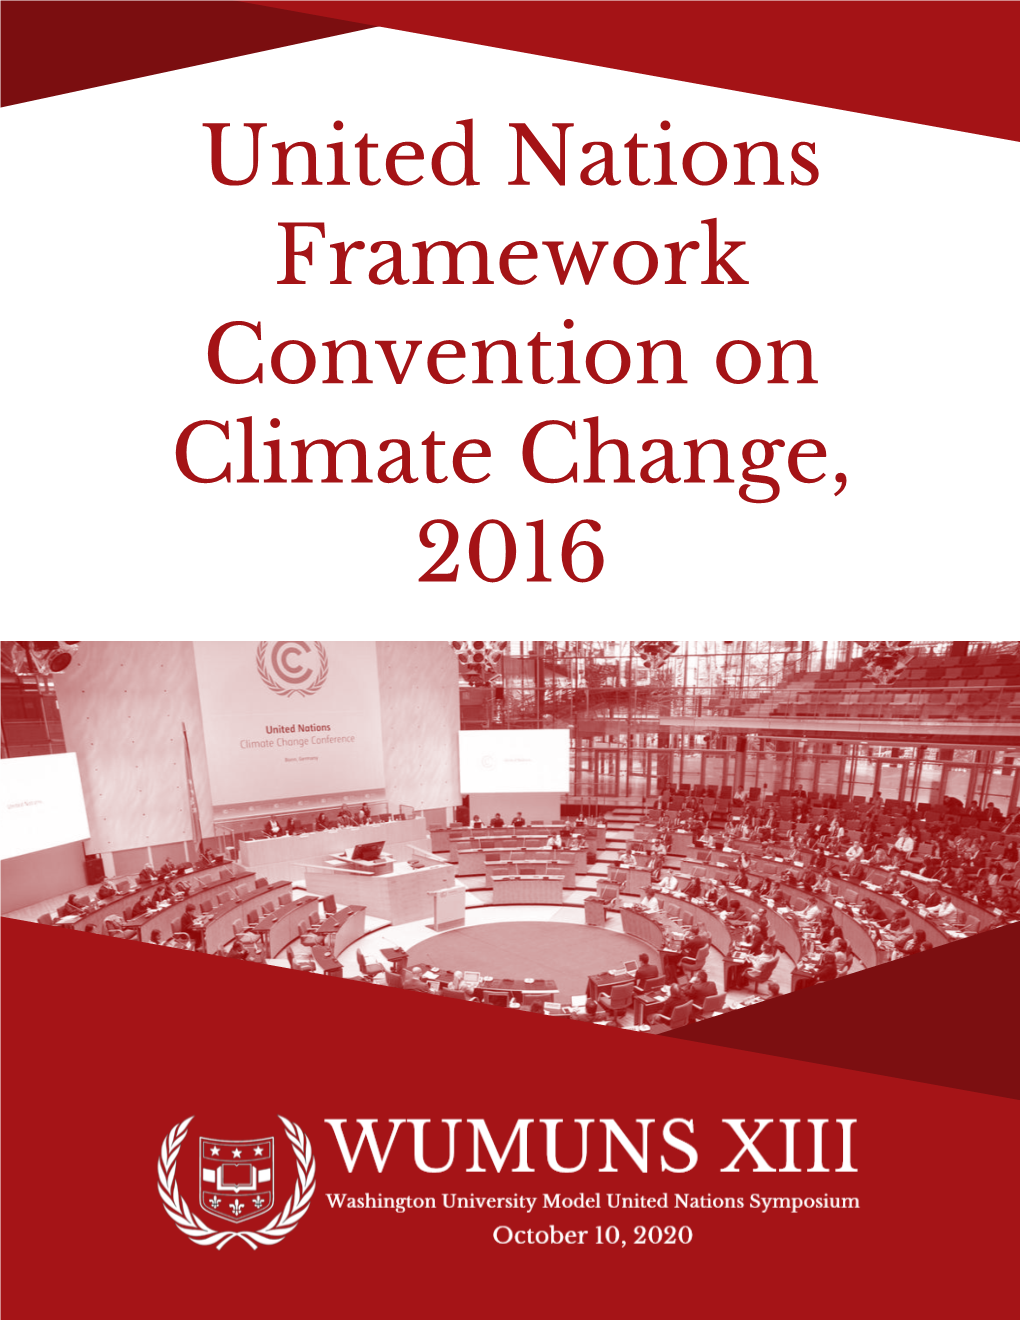 United Nations Framework Convention on Climate Change, 2016